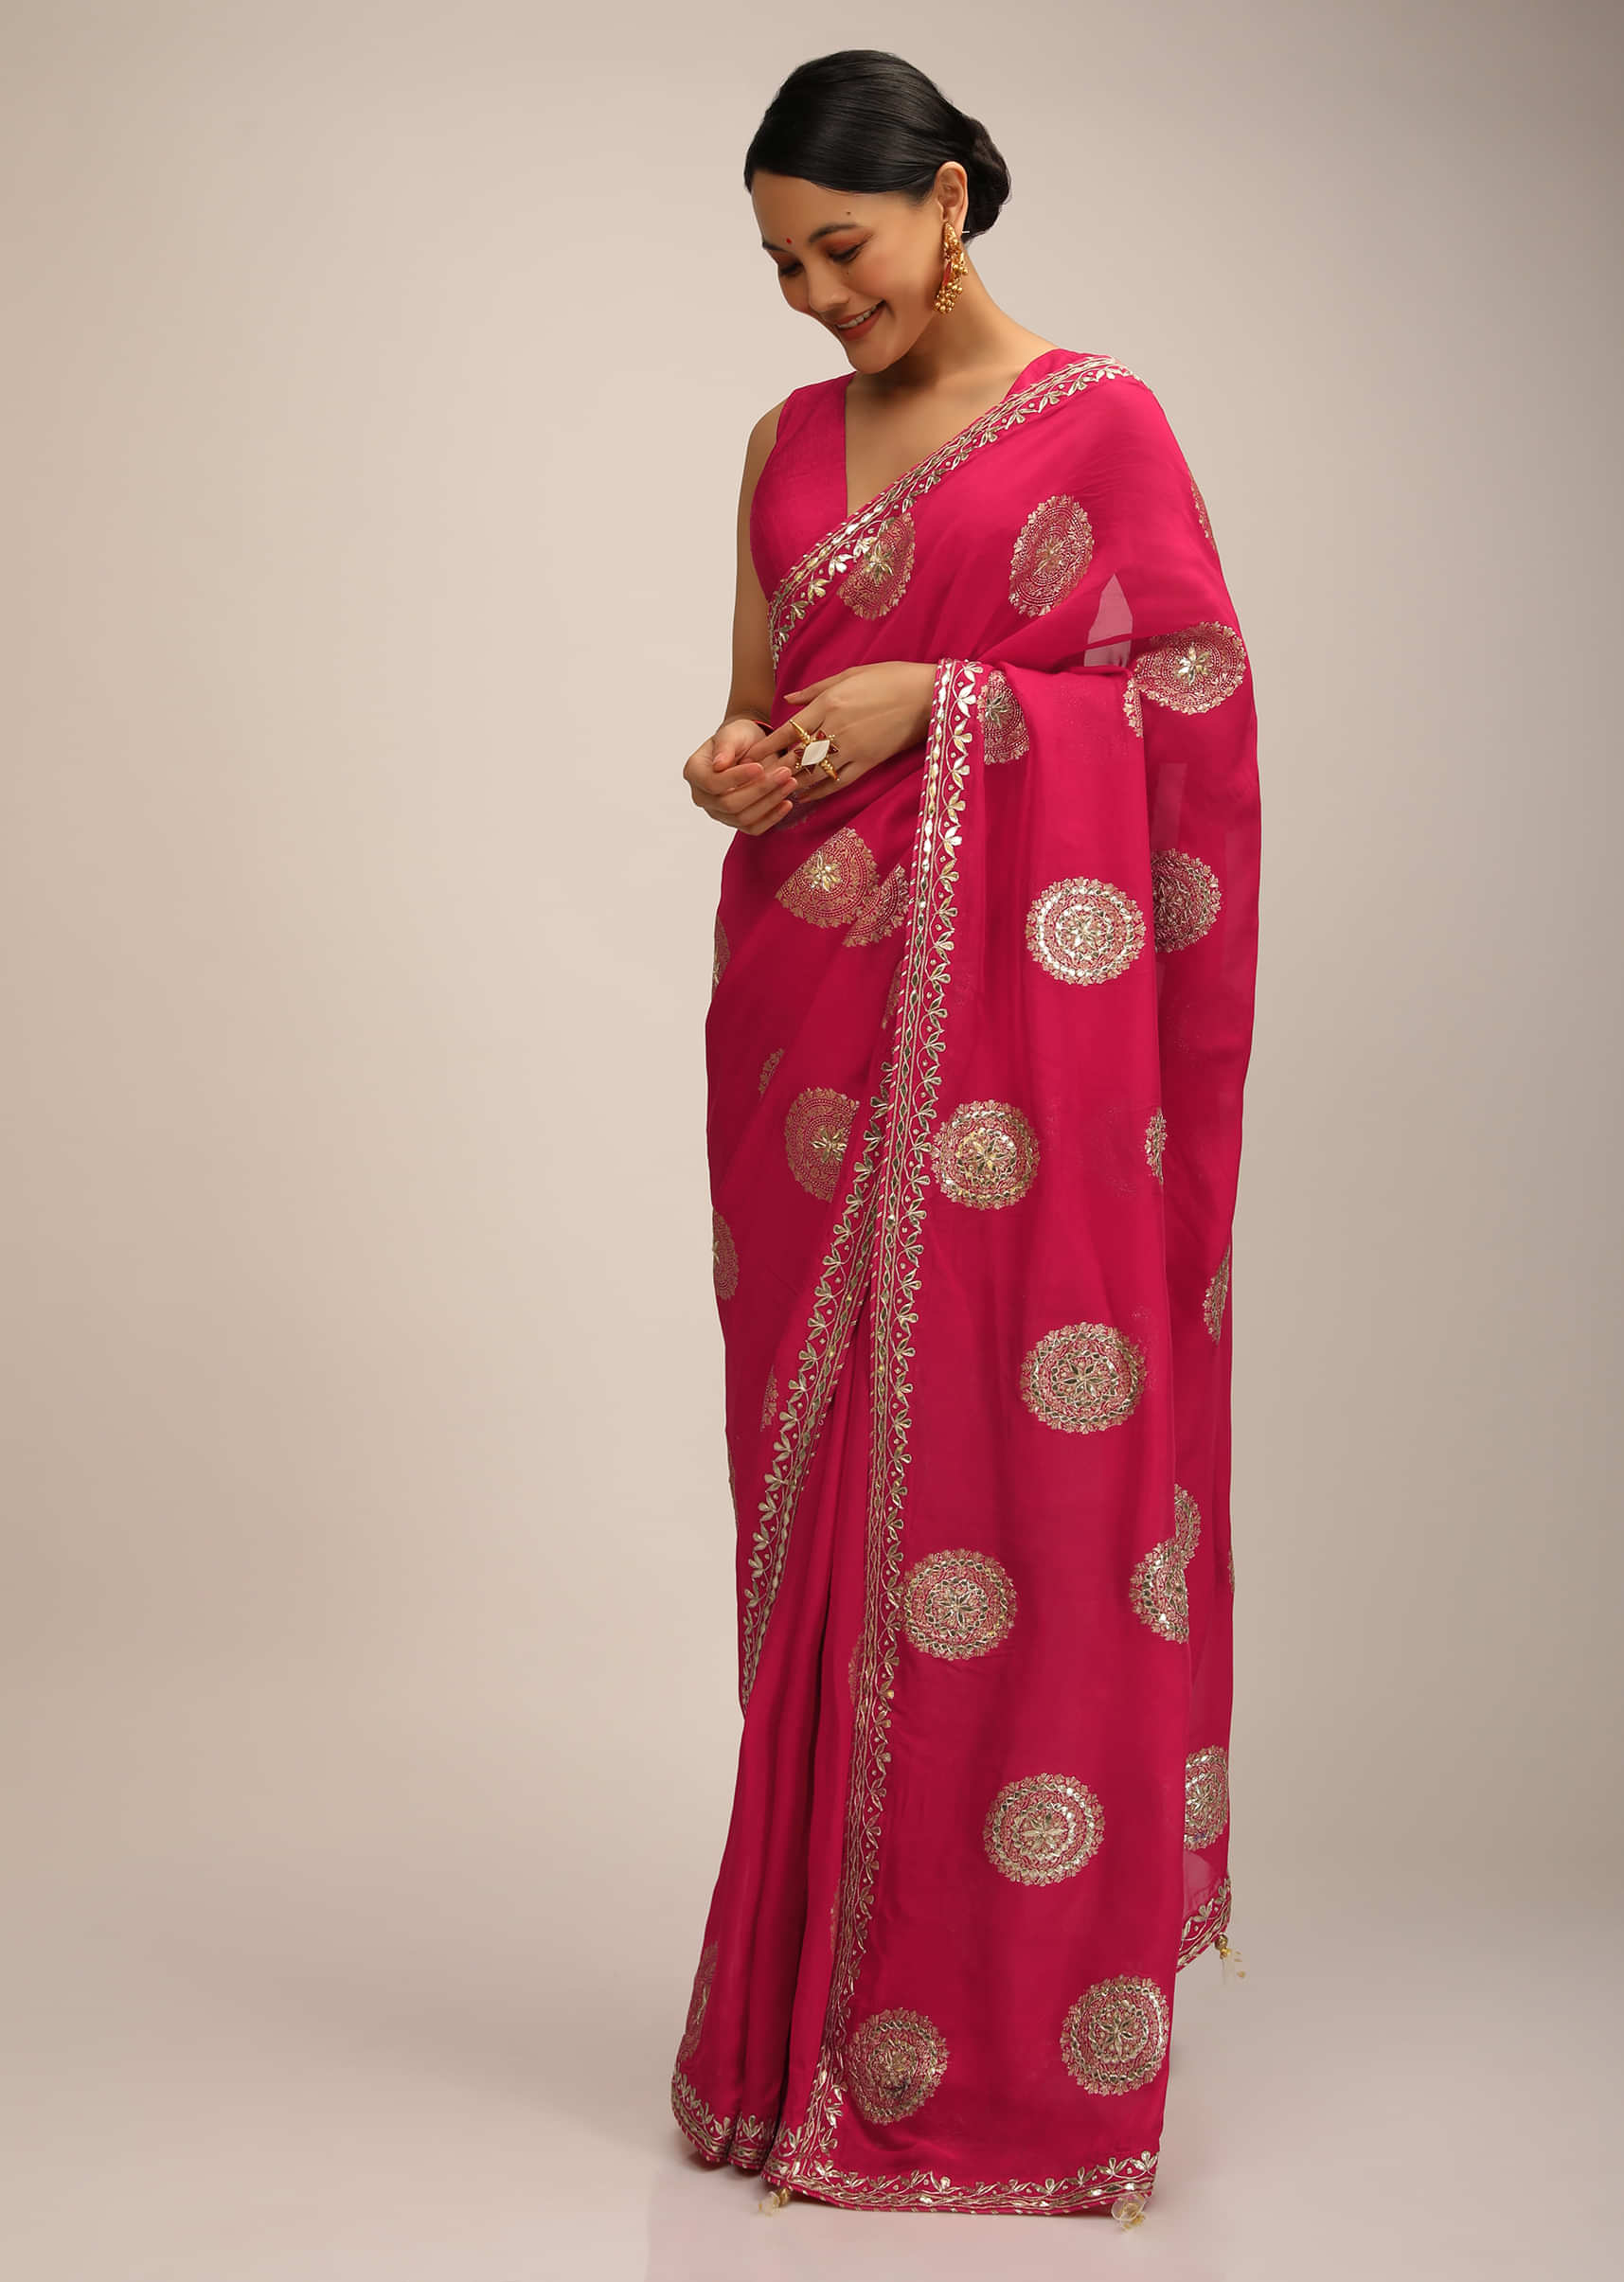 Rani Pink Saree In Organza With Woven Round Buttis And Gotta Embroidery